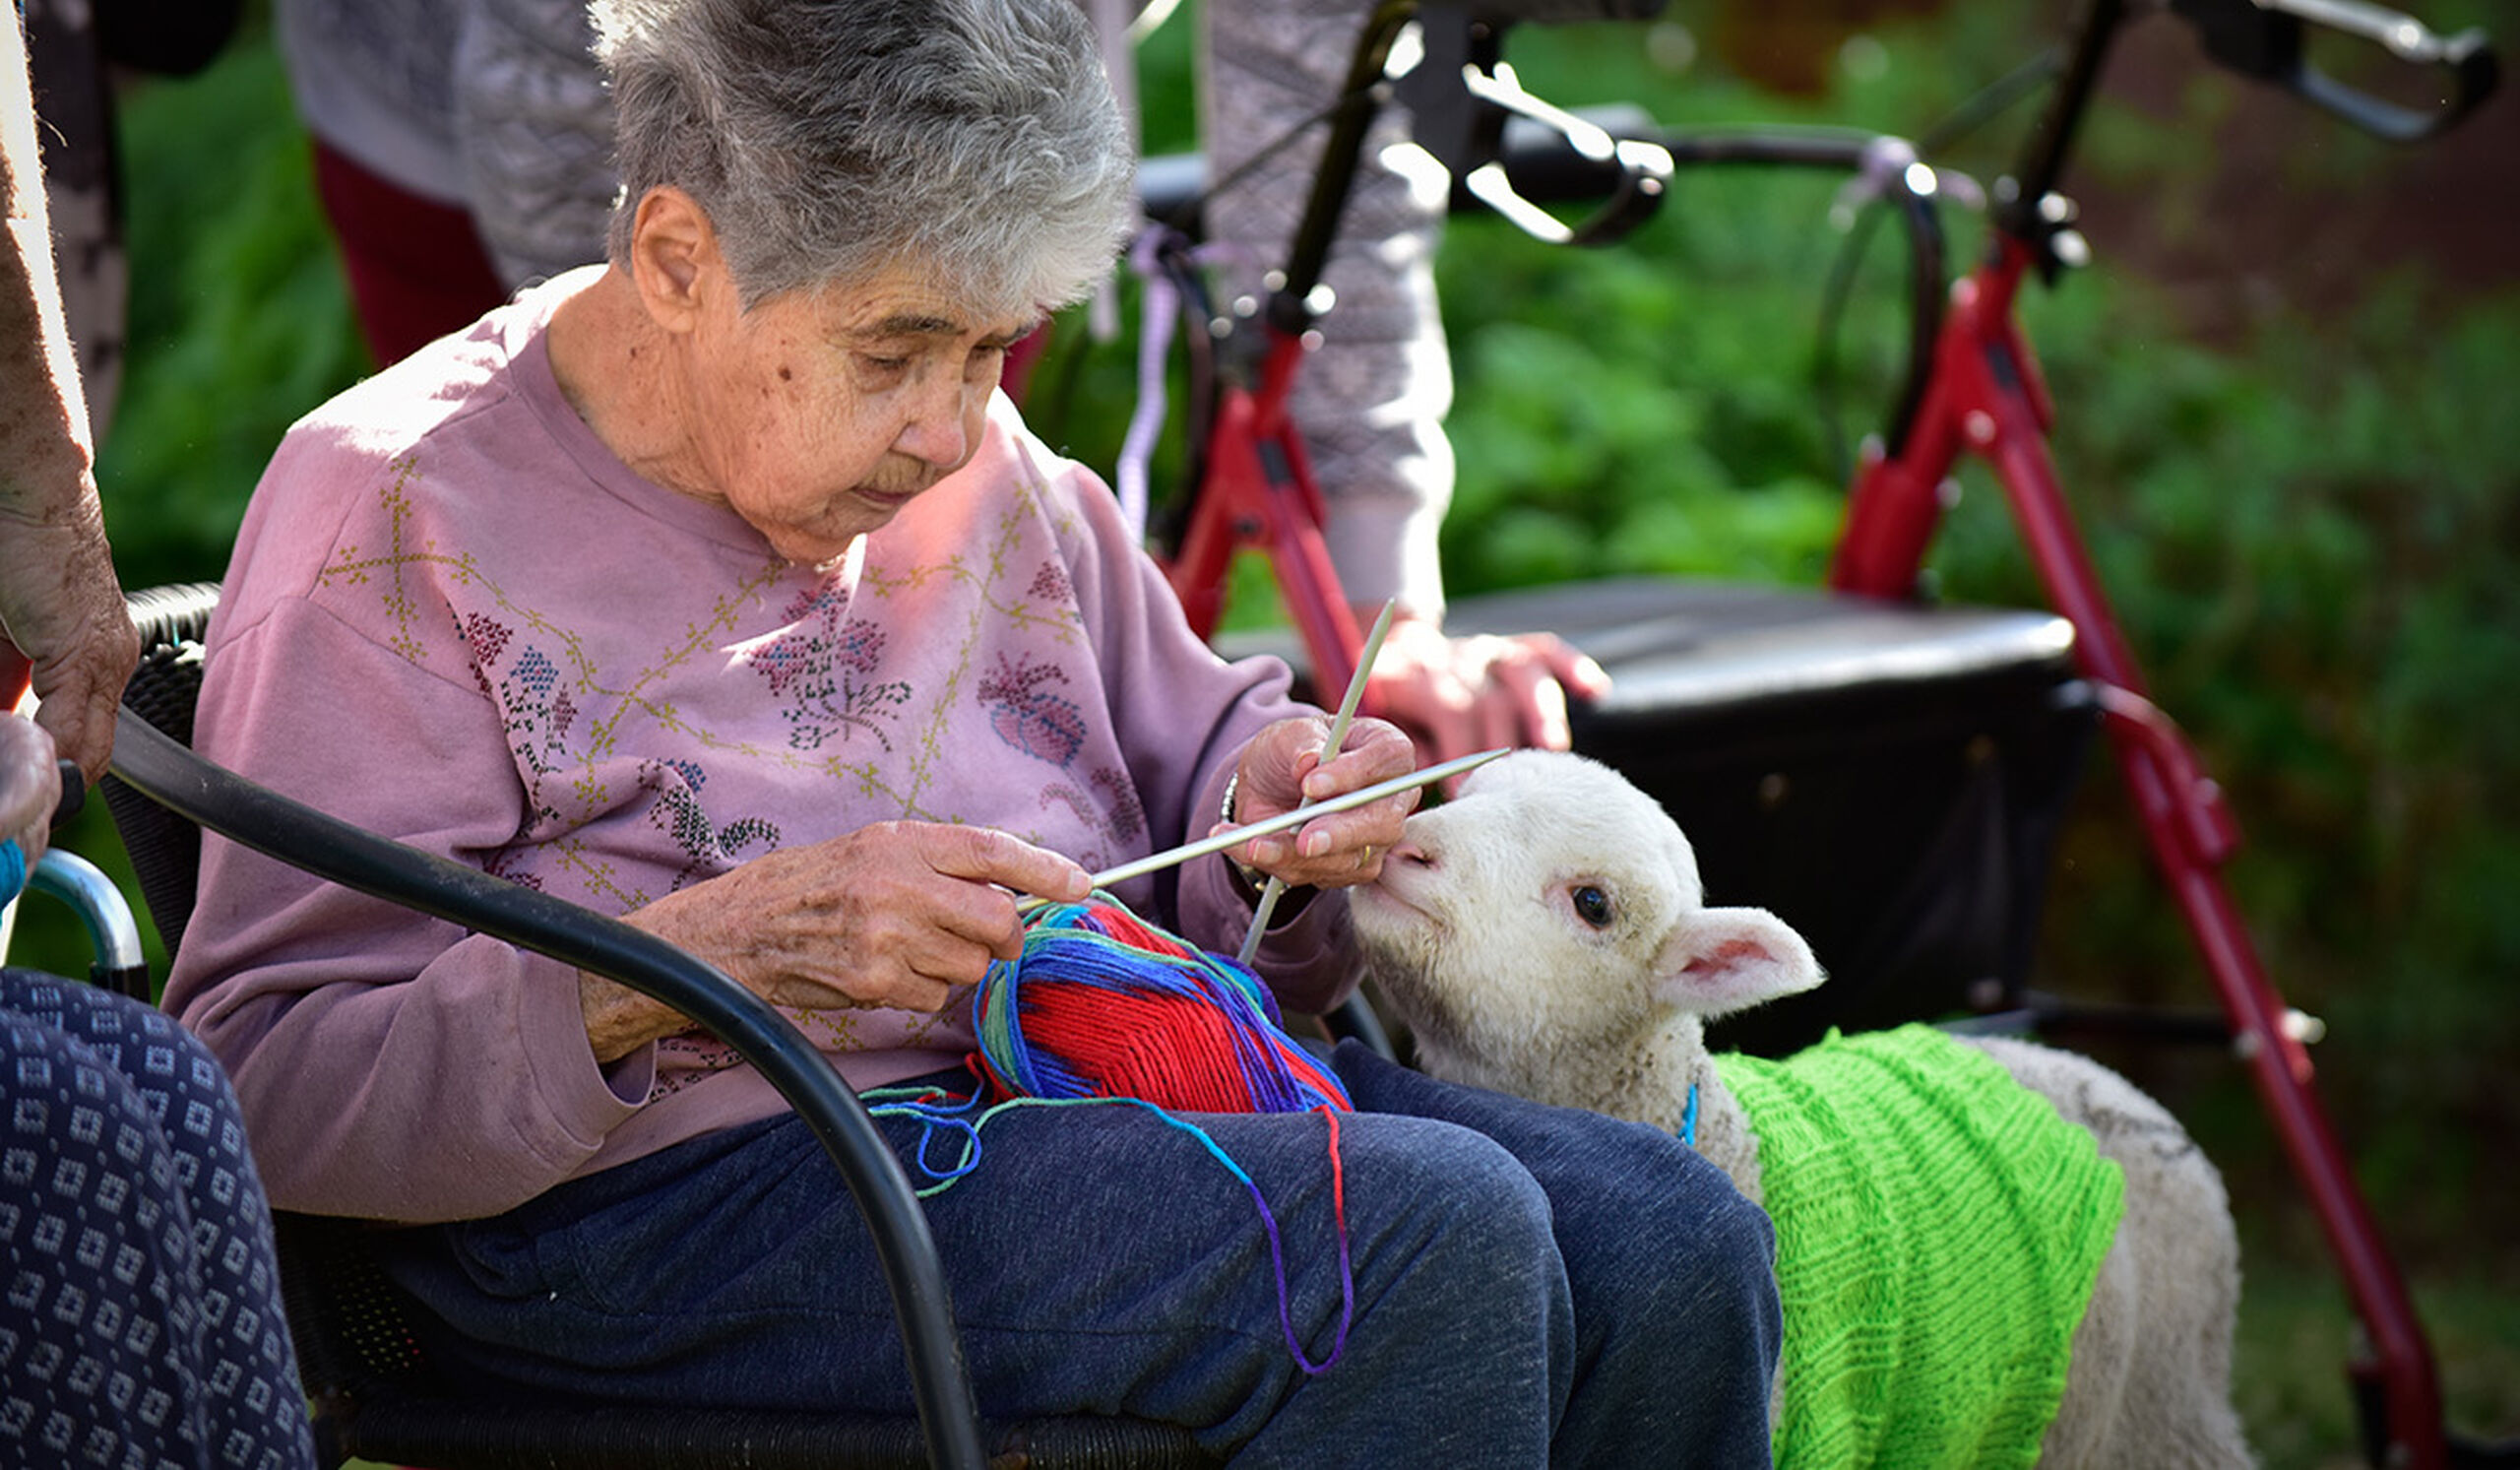 It is knit one purl two for winter lambs at William Carey Court Residential Aged Care in Busselton